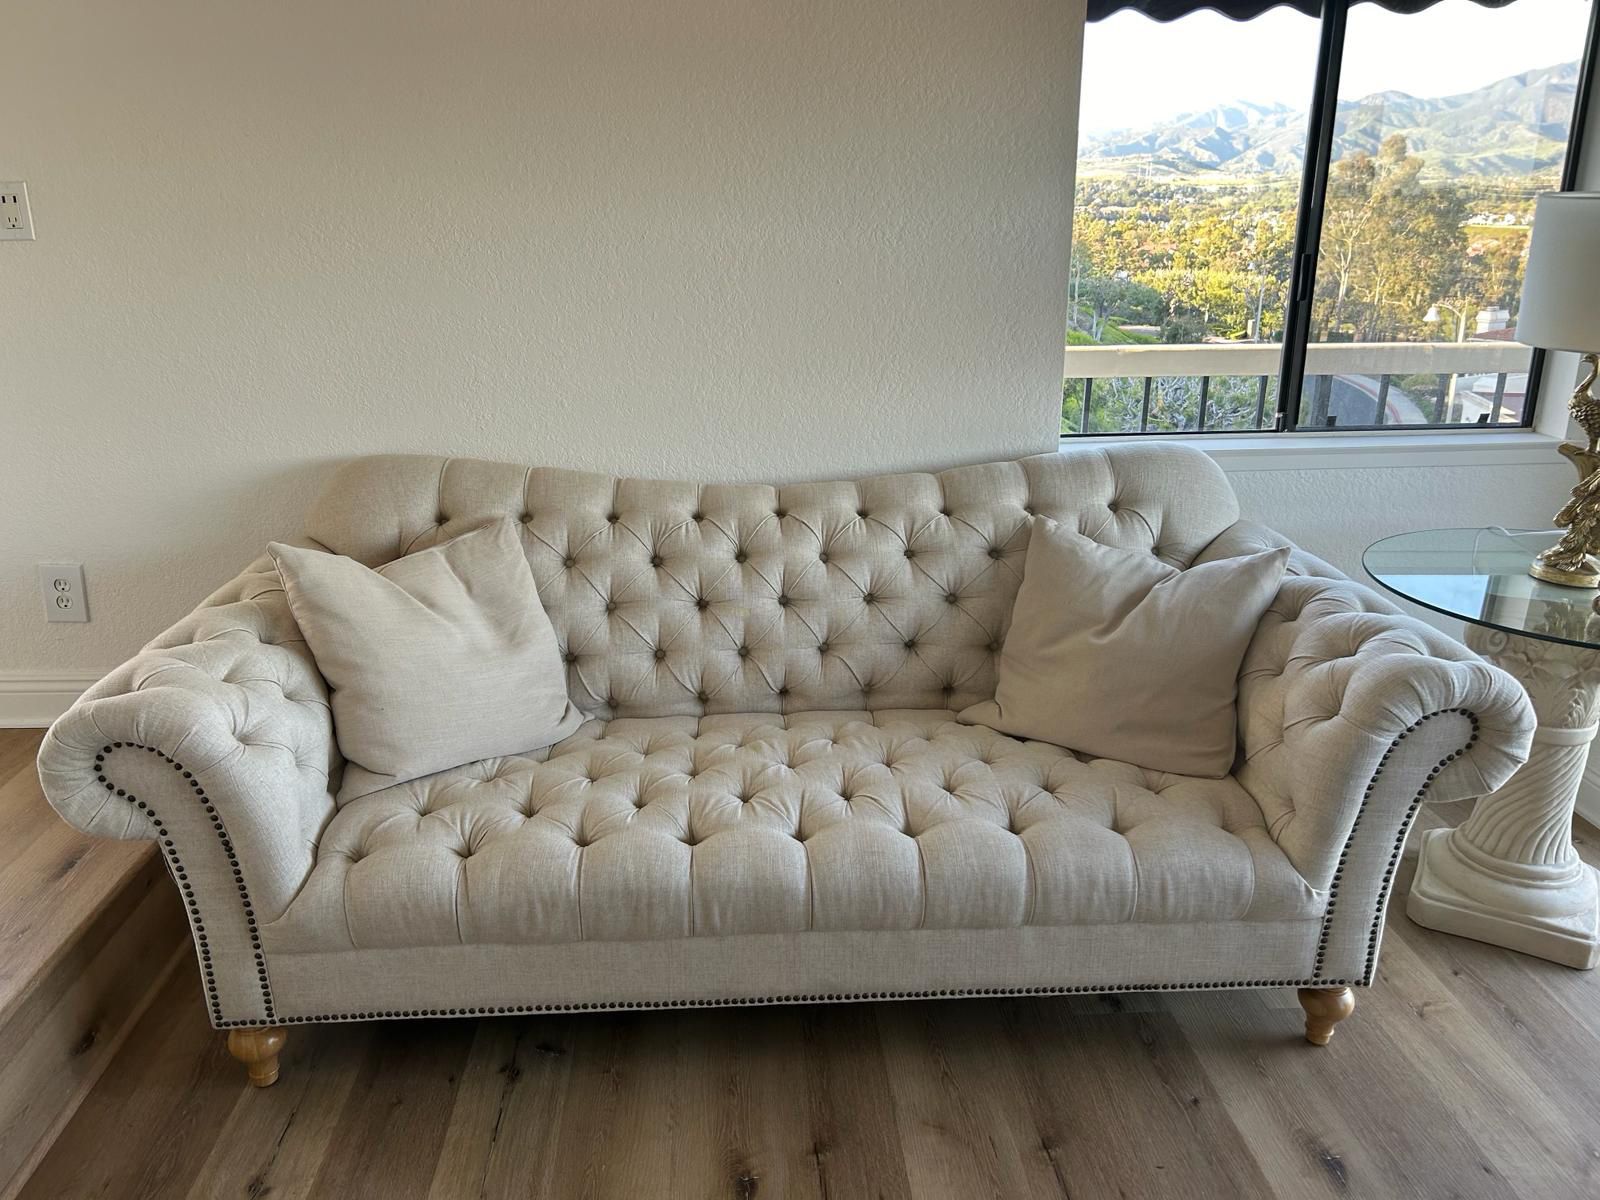 Tufted French Sofa